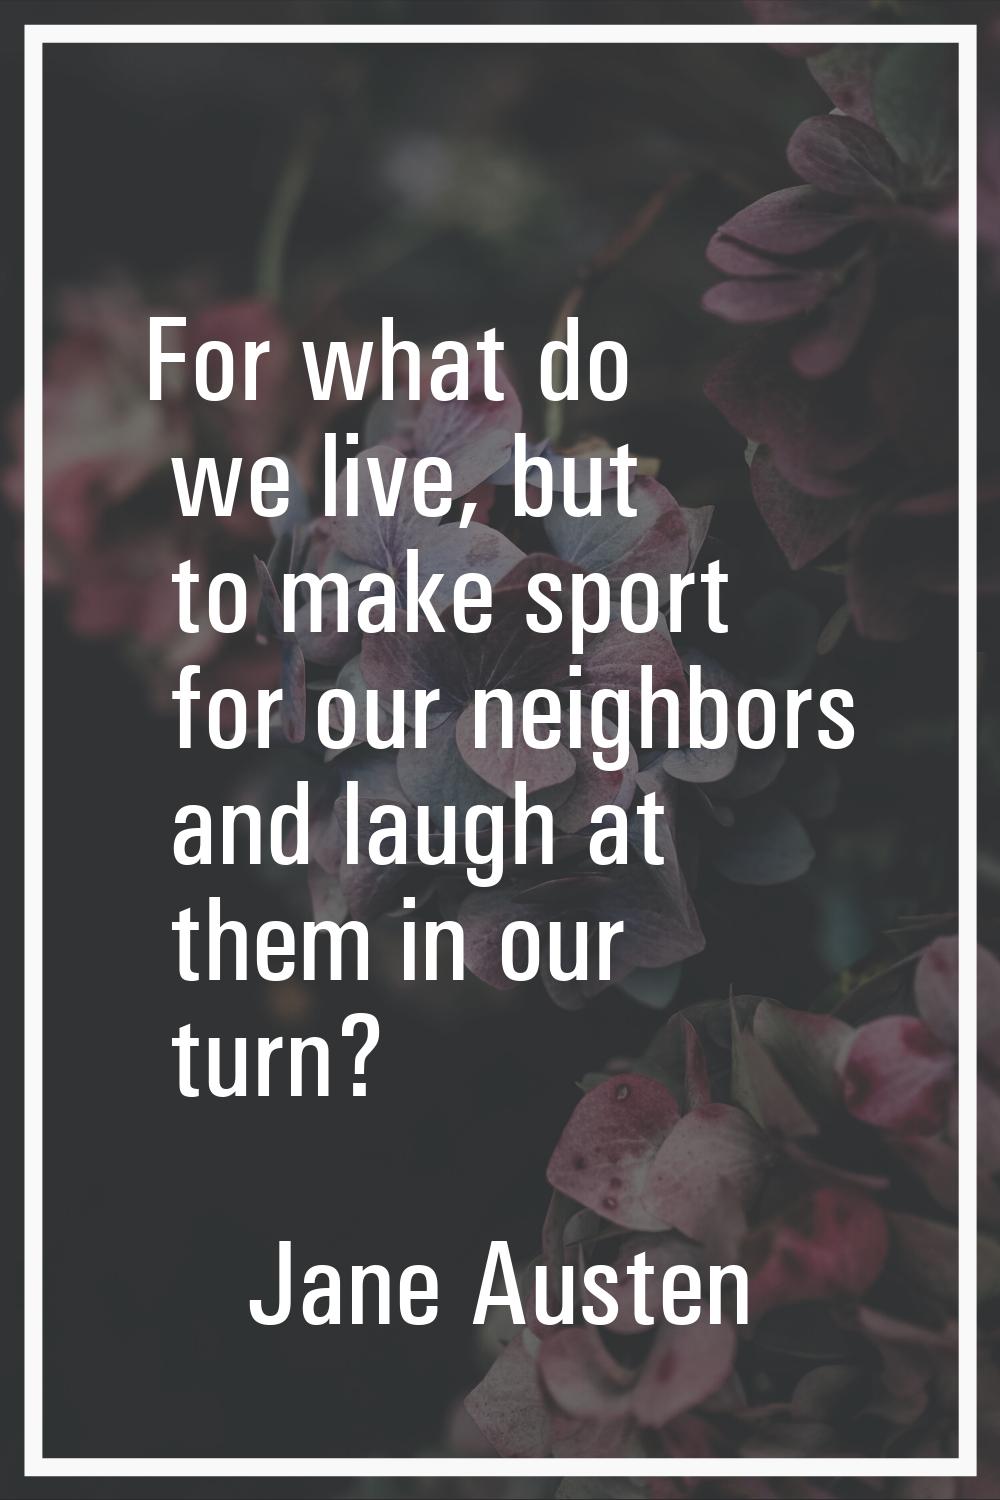 For what do we live, but to make sport for our neighbors and laugh at them in our turn?